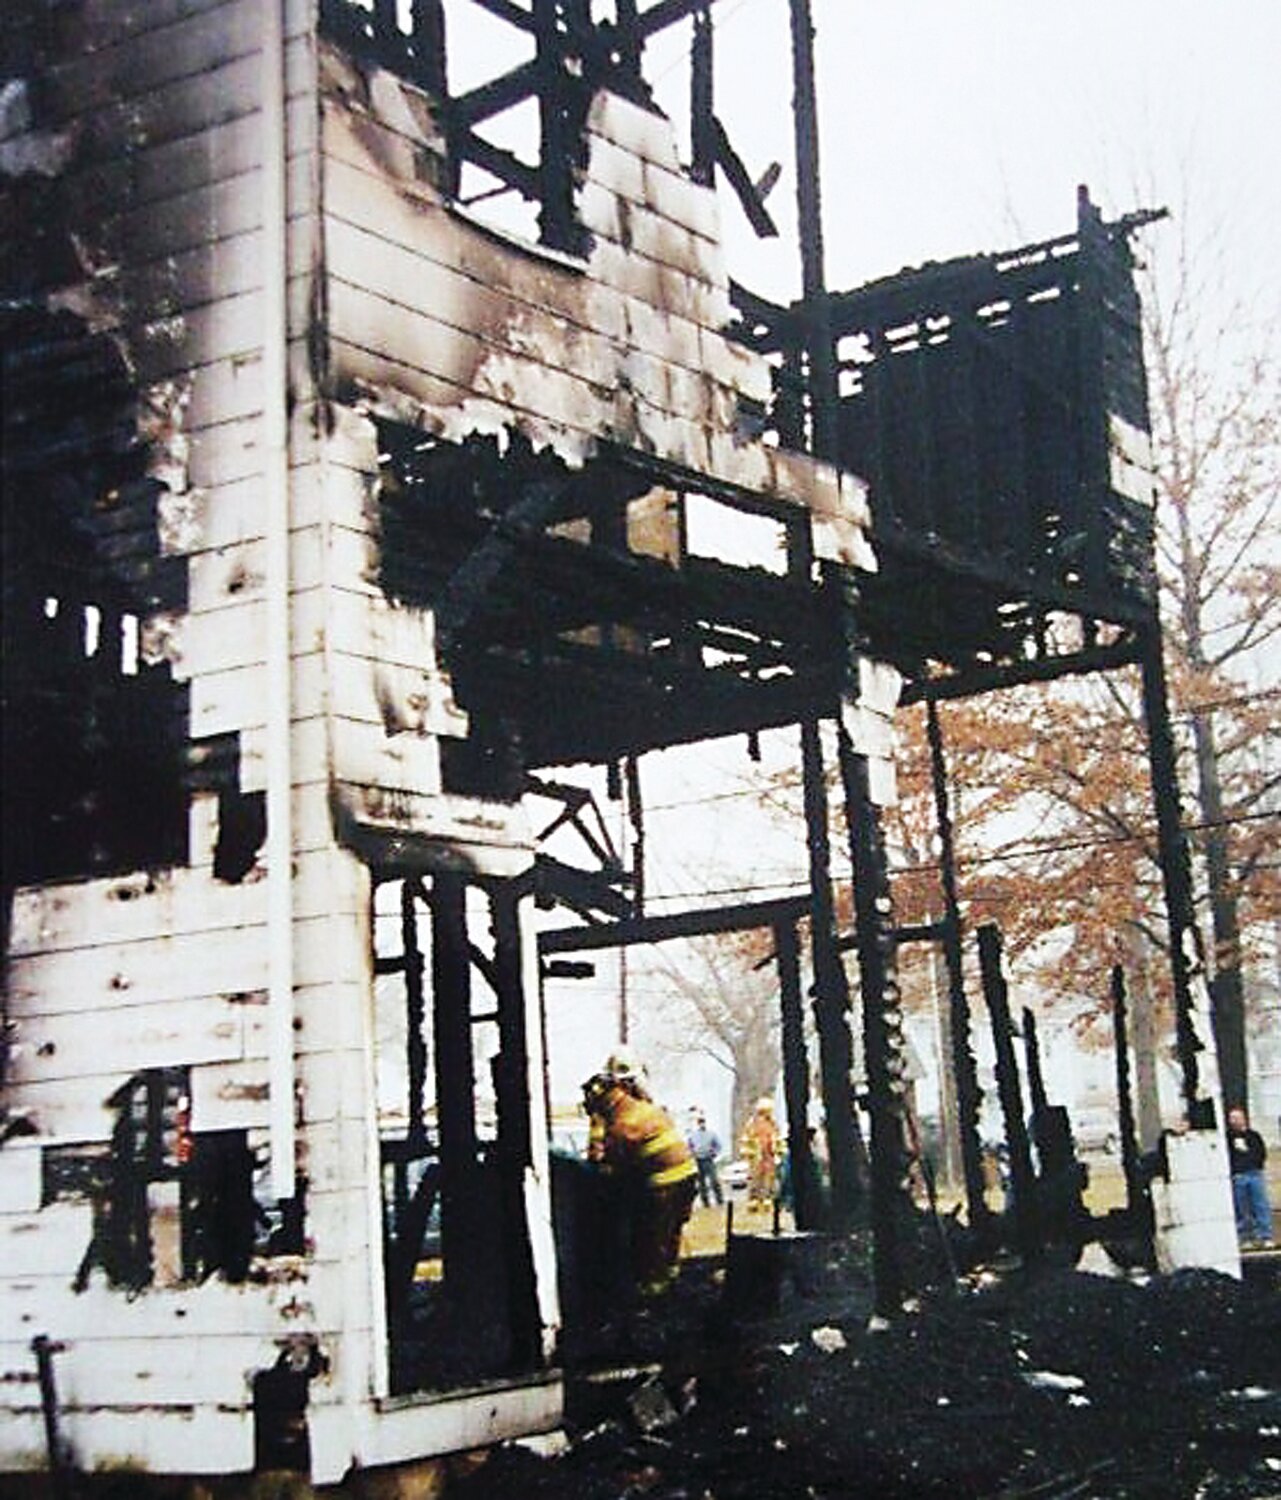 Crews work at the ruins of Ivyland Borough Hall as onlookers take in the scene of the charred structure in January 1998.